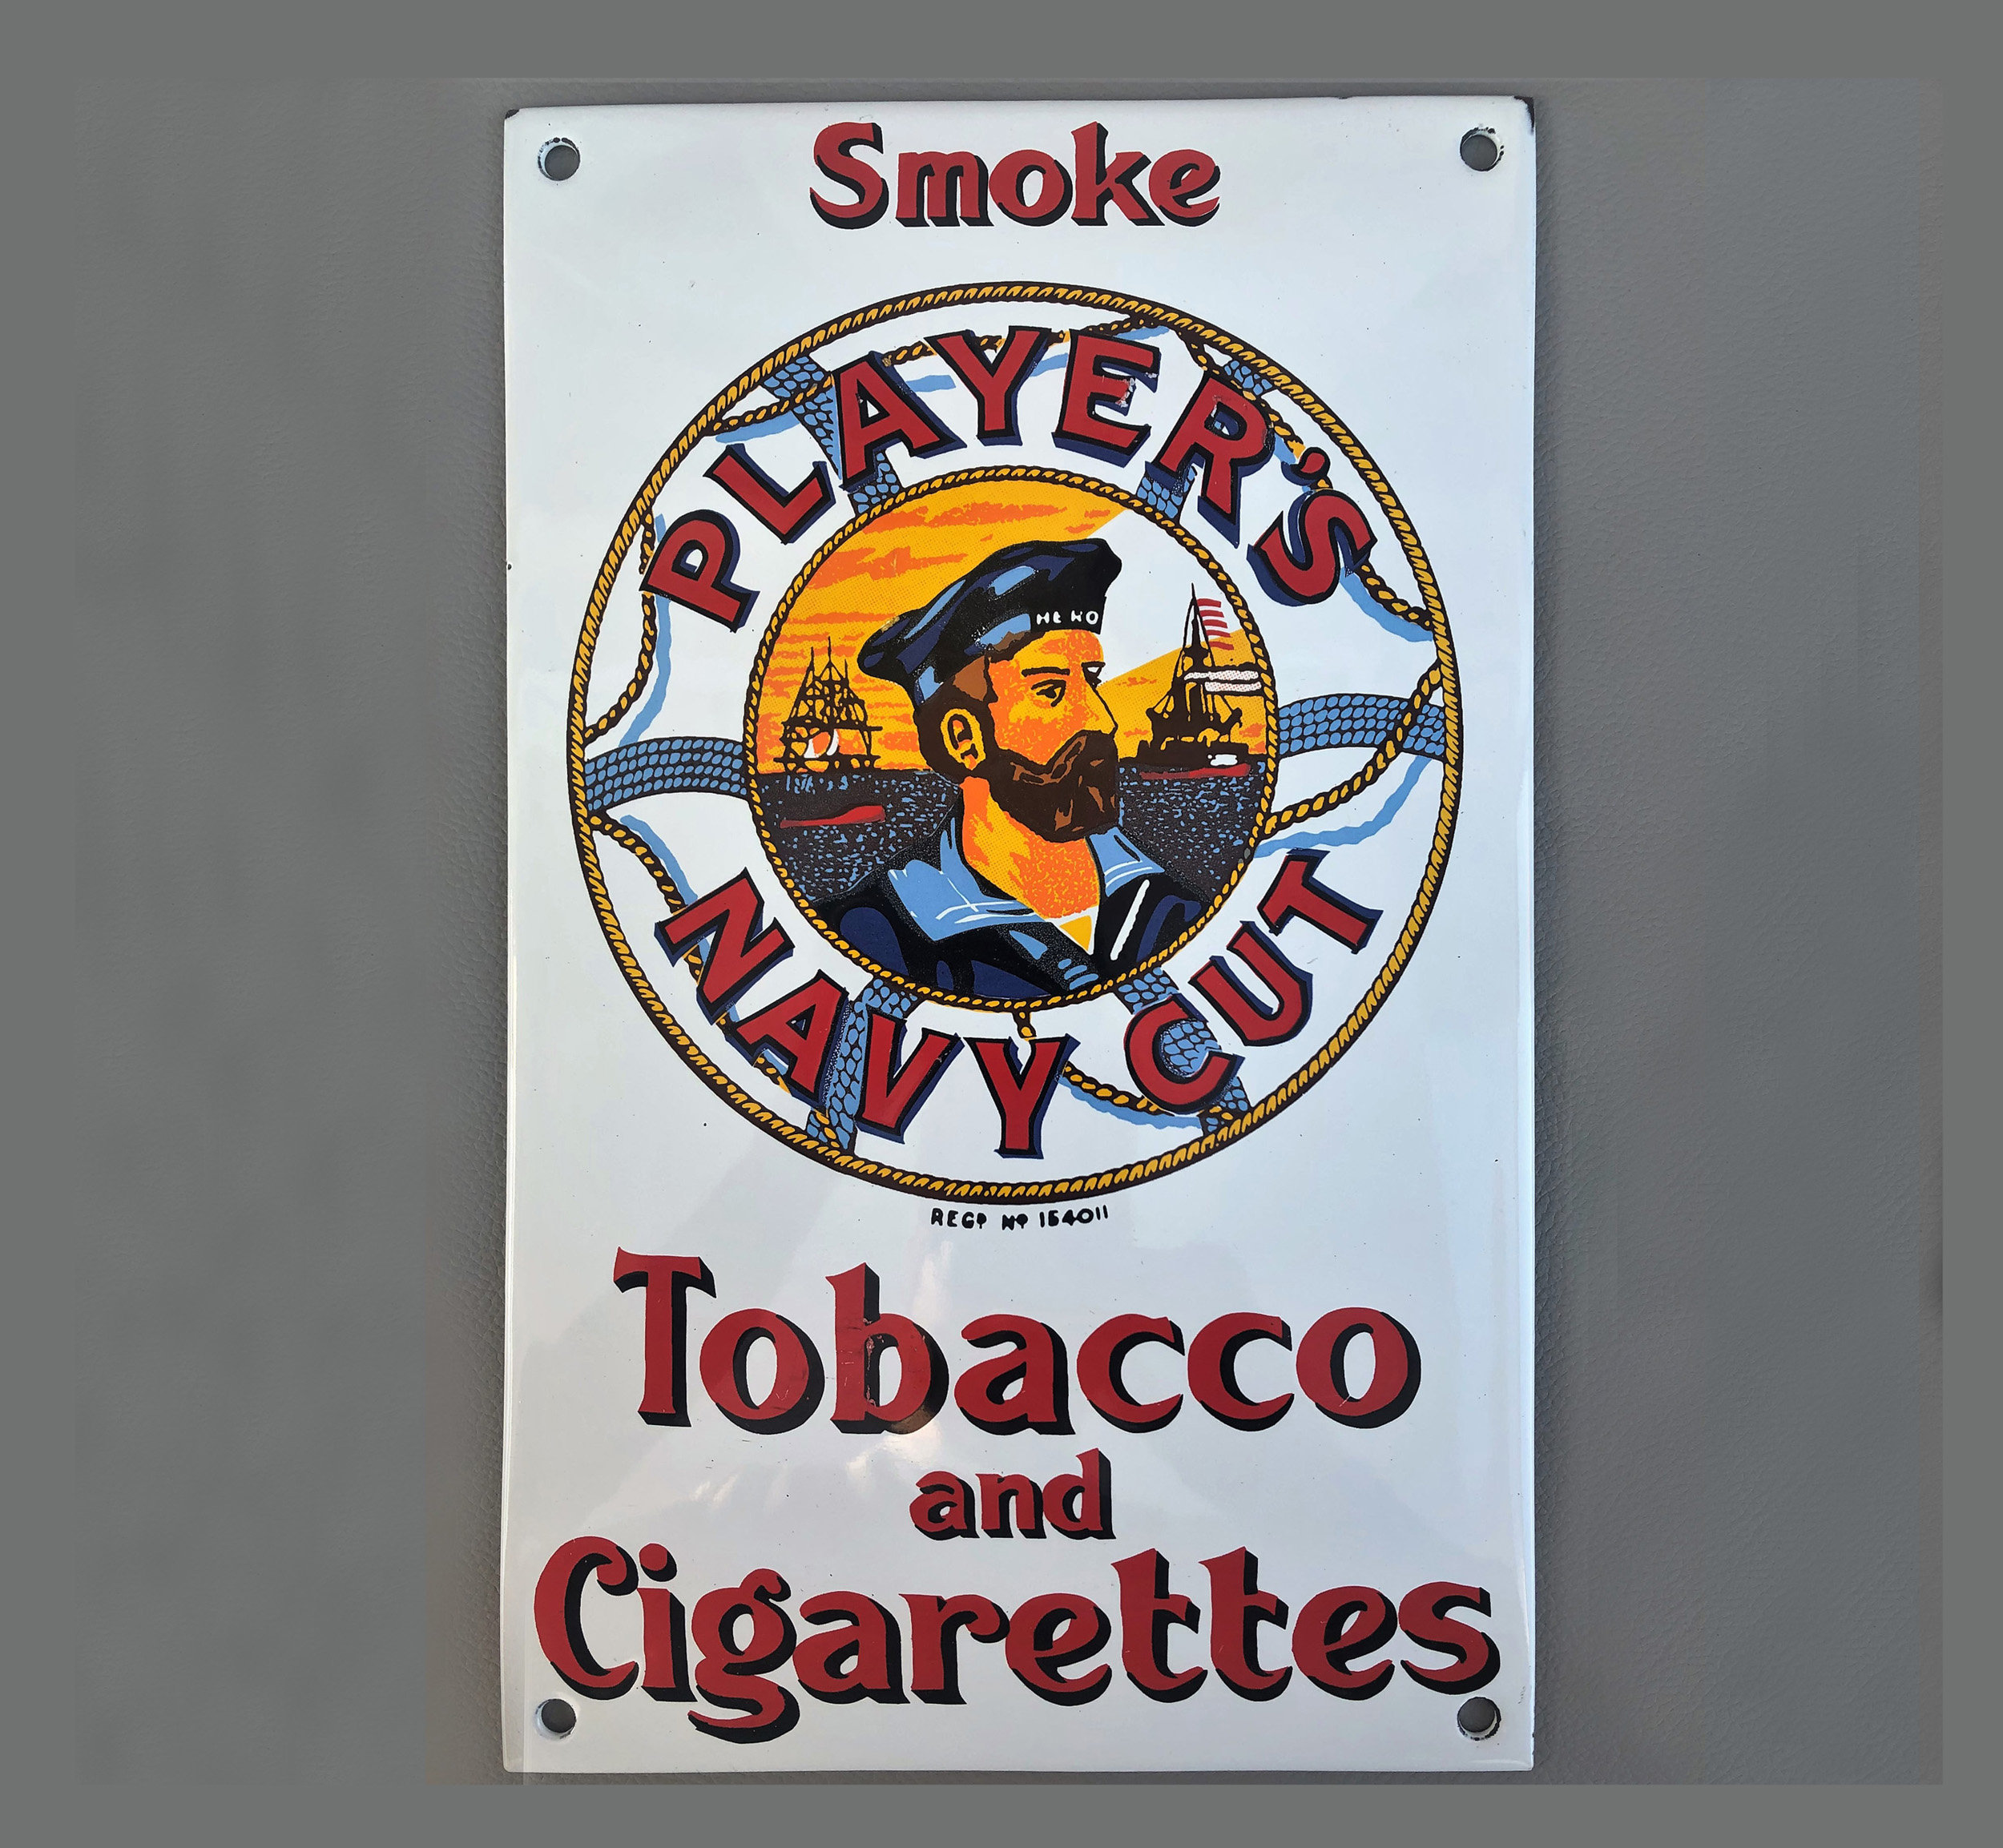 Players's Navy Cut Tobacco and Cigarettes, Tobacco Adverts …